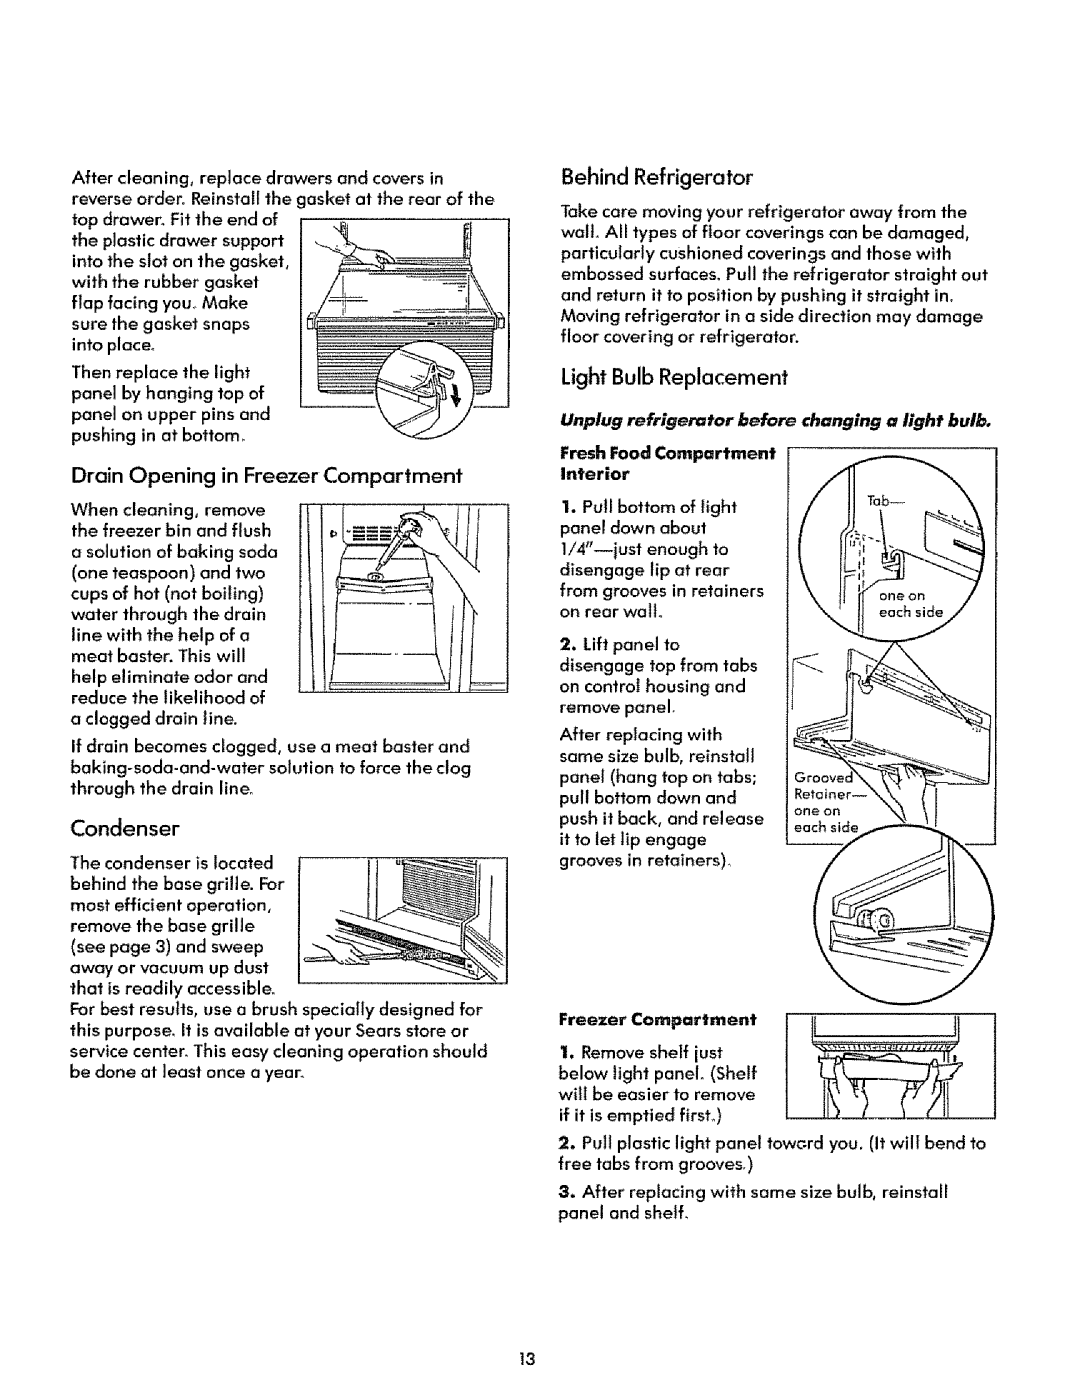 Sears 51271, 51278 manual Condenser, Drain Opening in Freezer Compartment, Light Bulb Replacement, Behind Refrigerator 